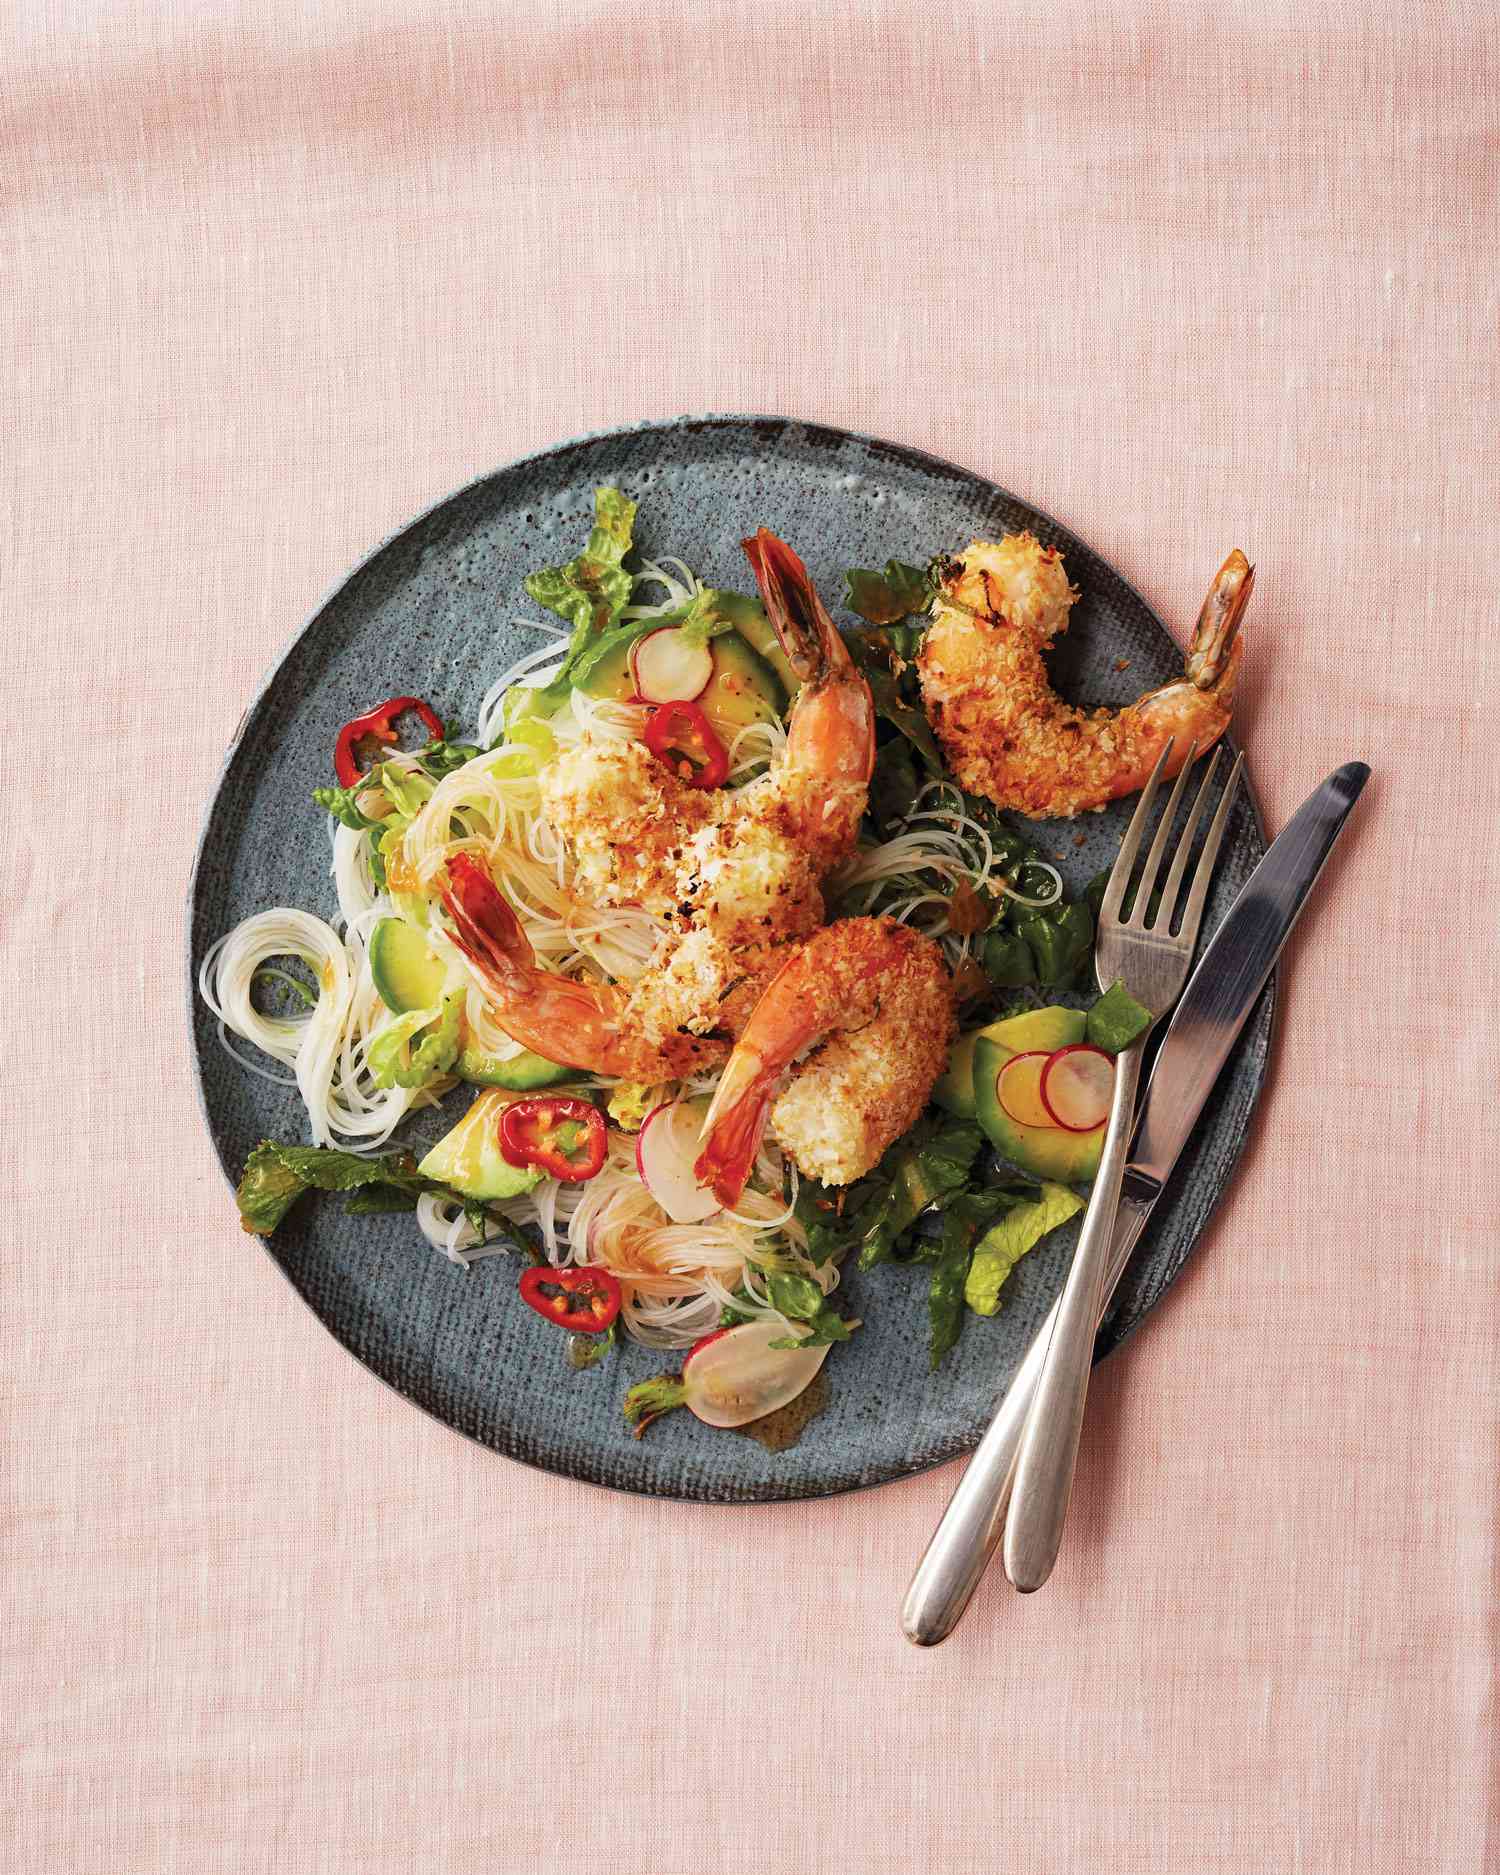 Broiled Coconut-and-Lime-Crusted Shrimp With Rice-Noodle Salad